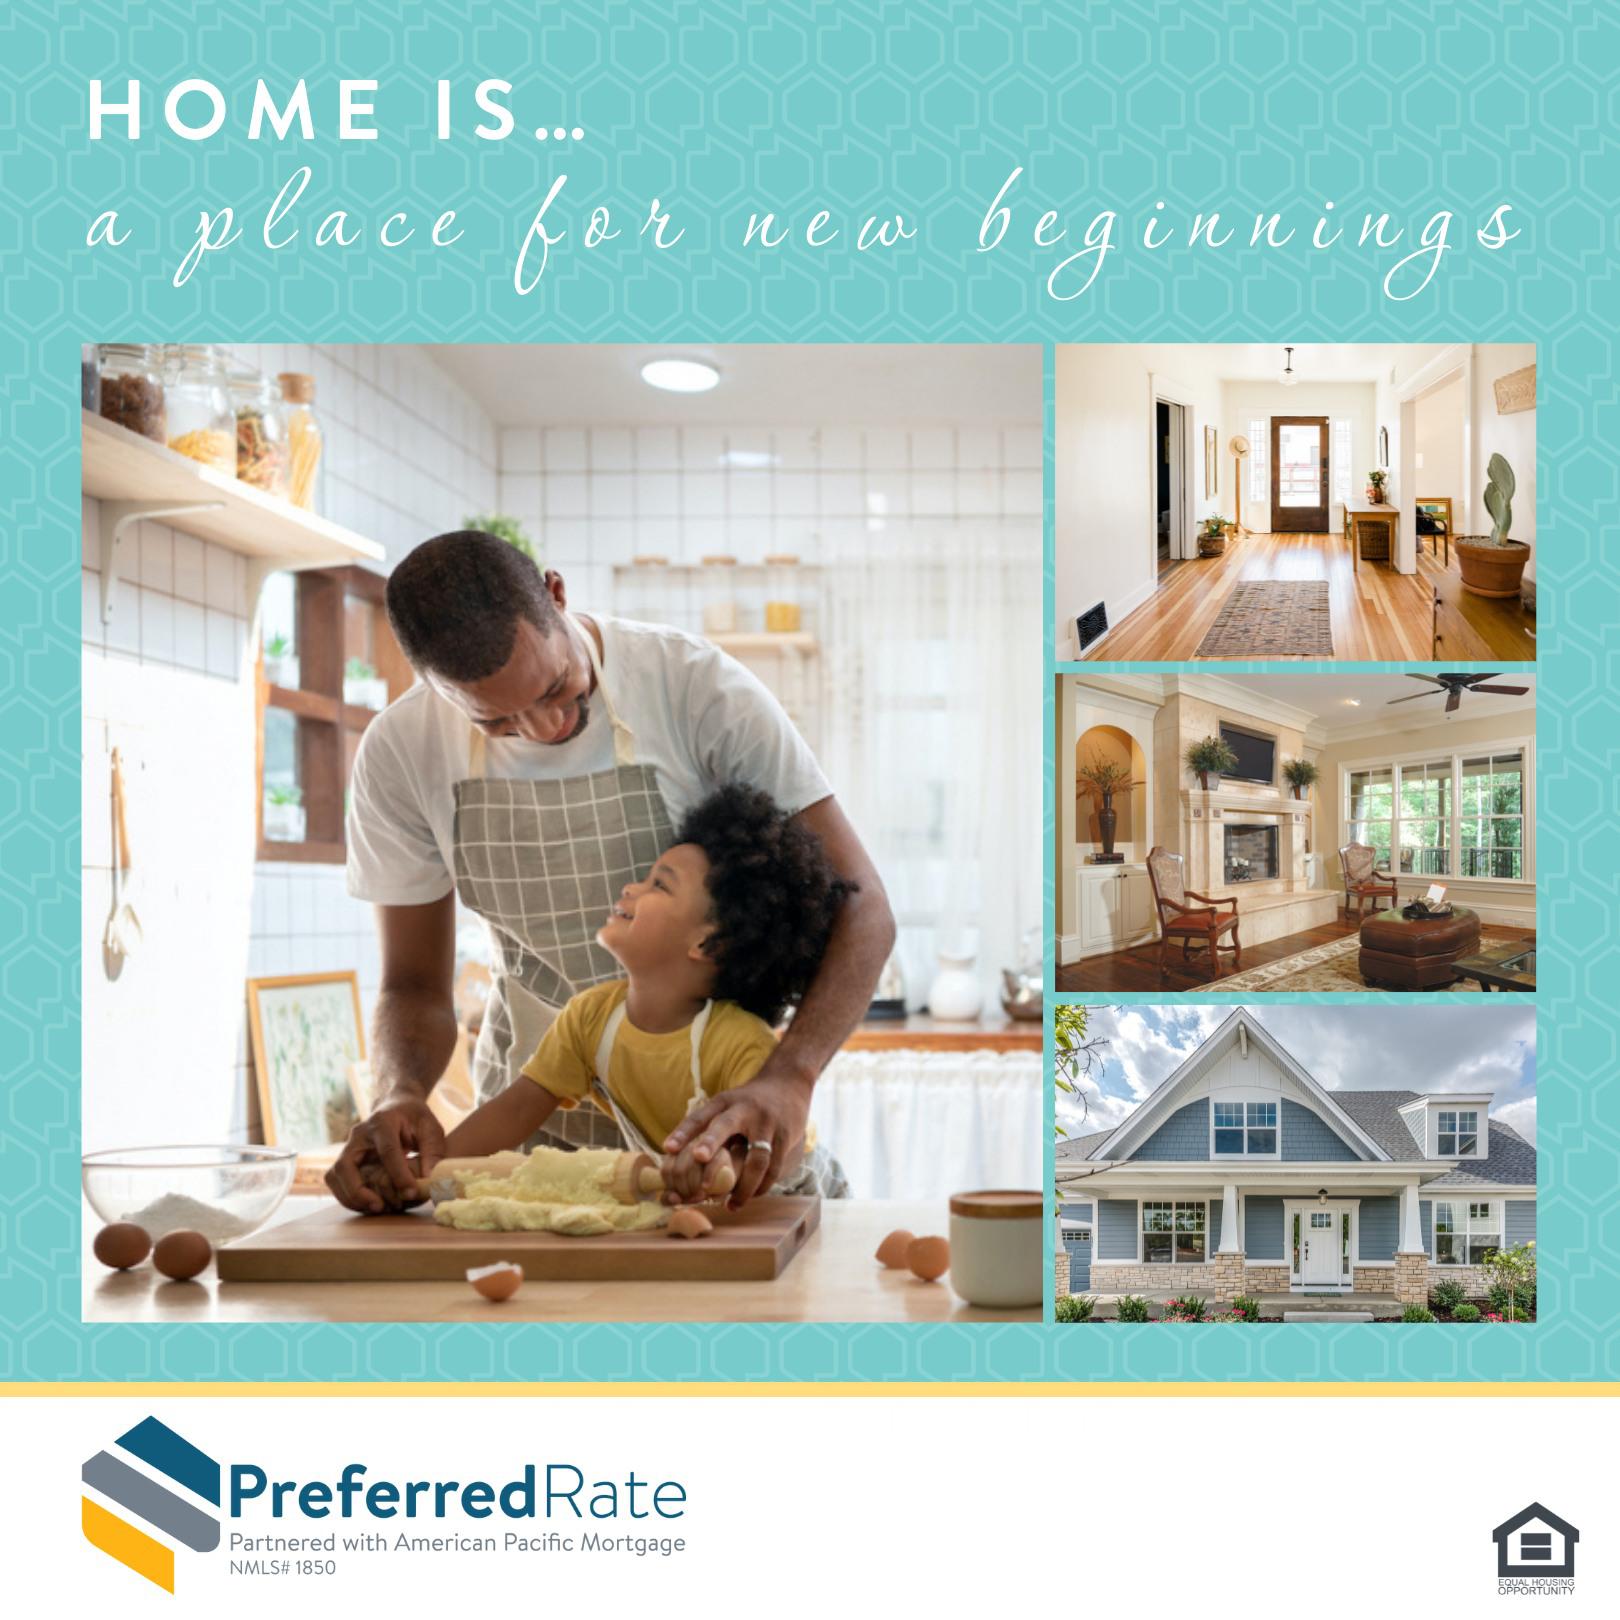 Home is a place for new beginnings. What's your favorite thing about homeownership? Loan Officer - 216621 Oakbrook Terrace (630)673-6735